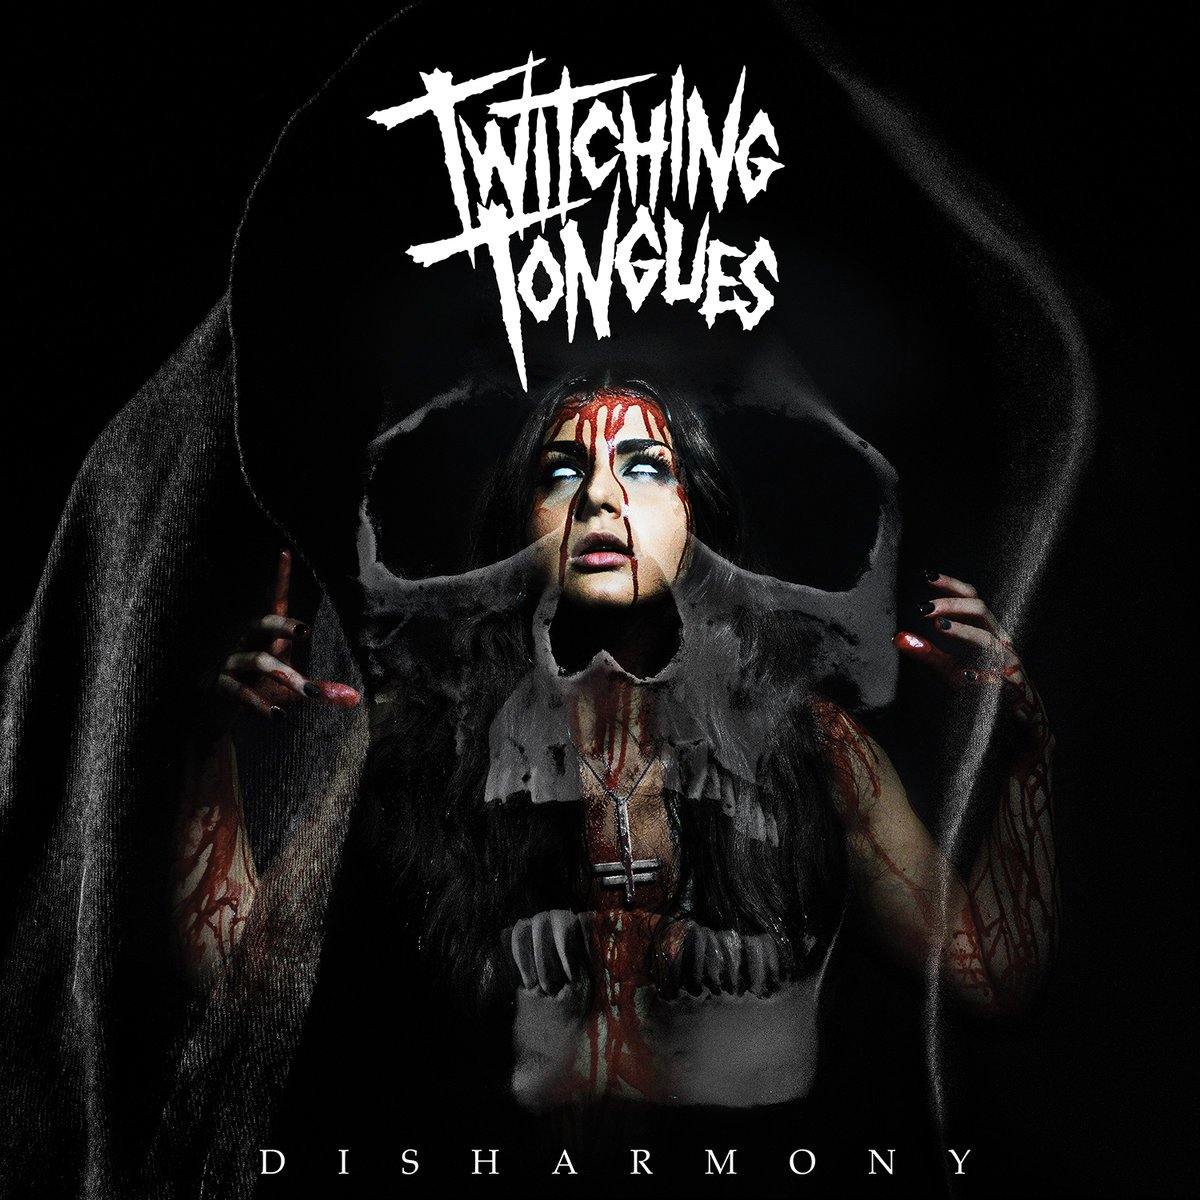 Buy – Twitching Tongues "Disharmony" 12" – Band & Music Merch – Cold Cuts Merch